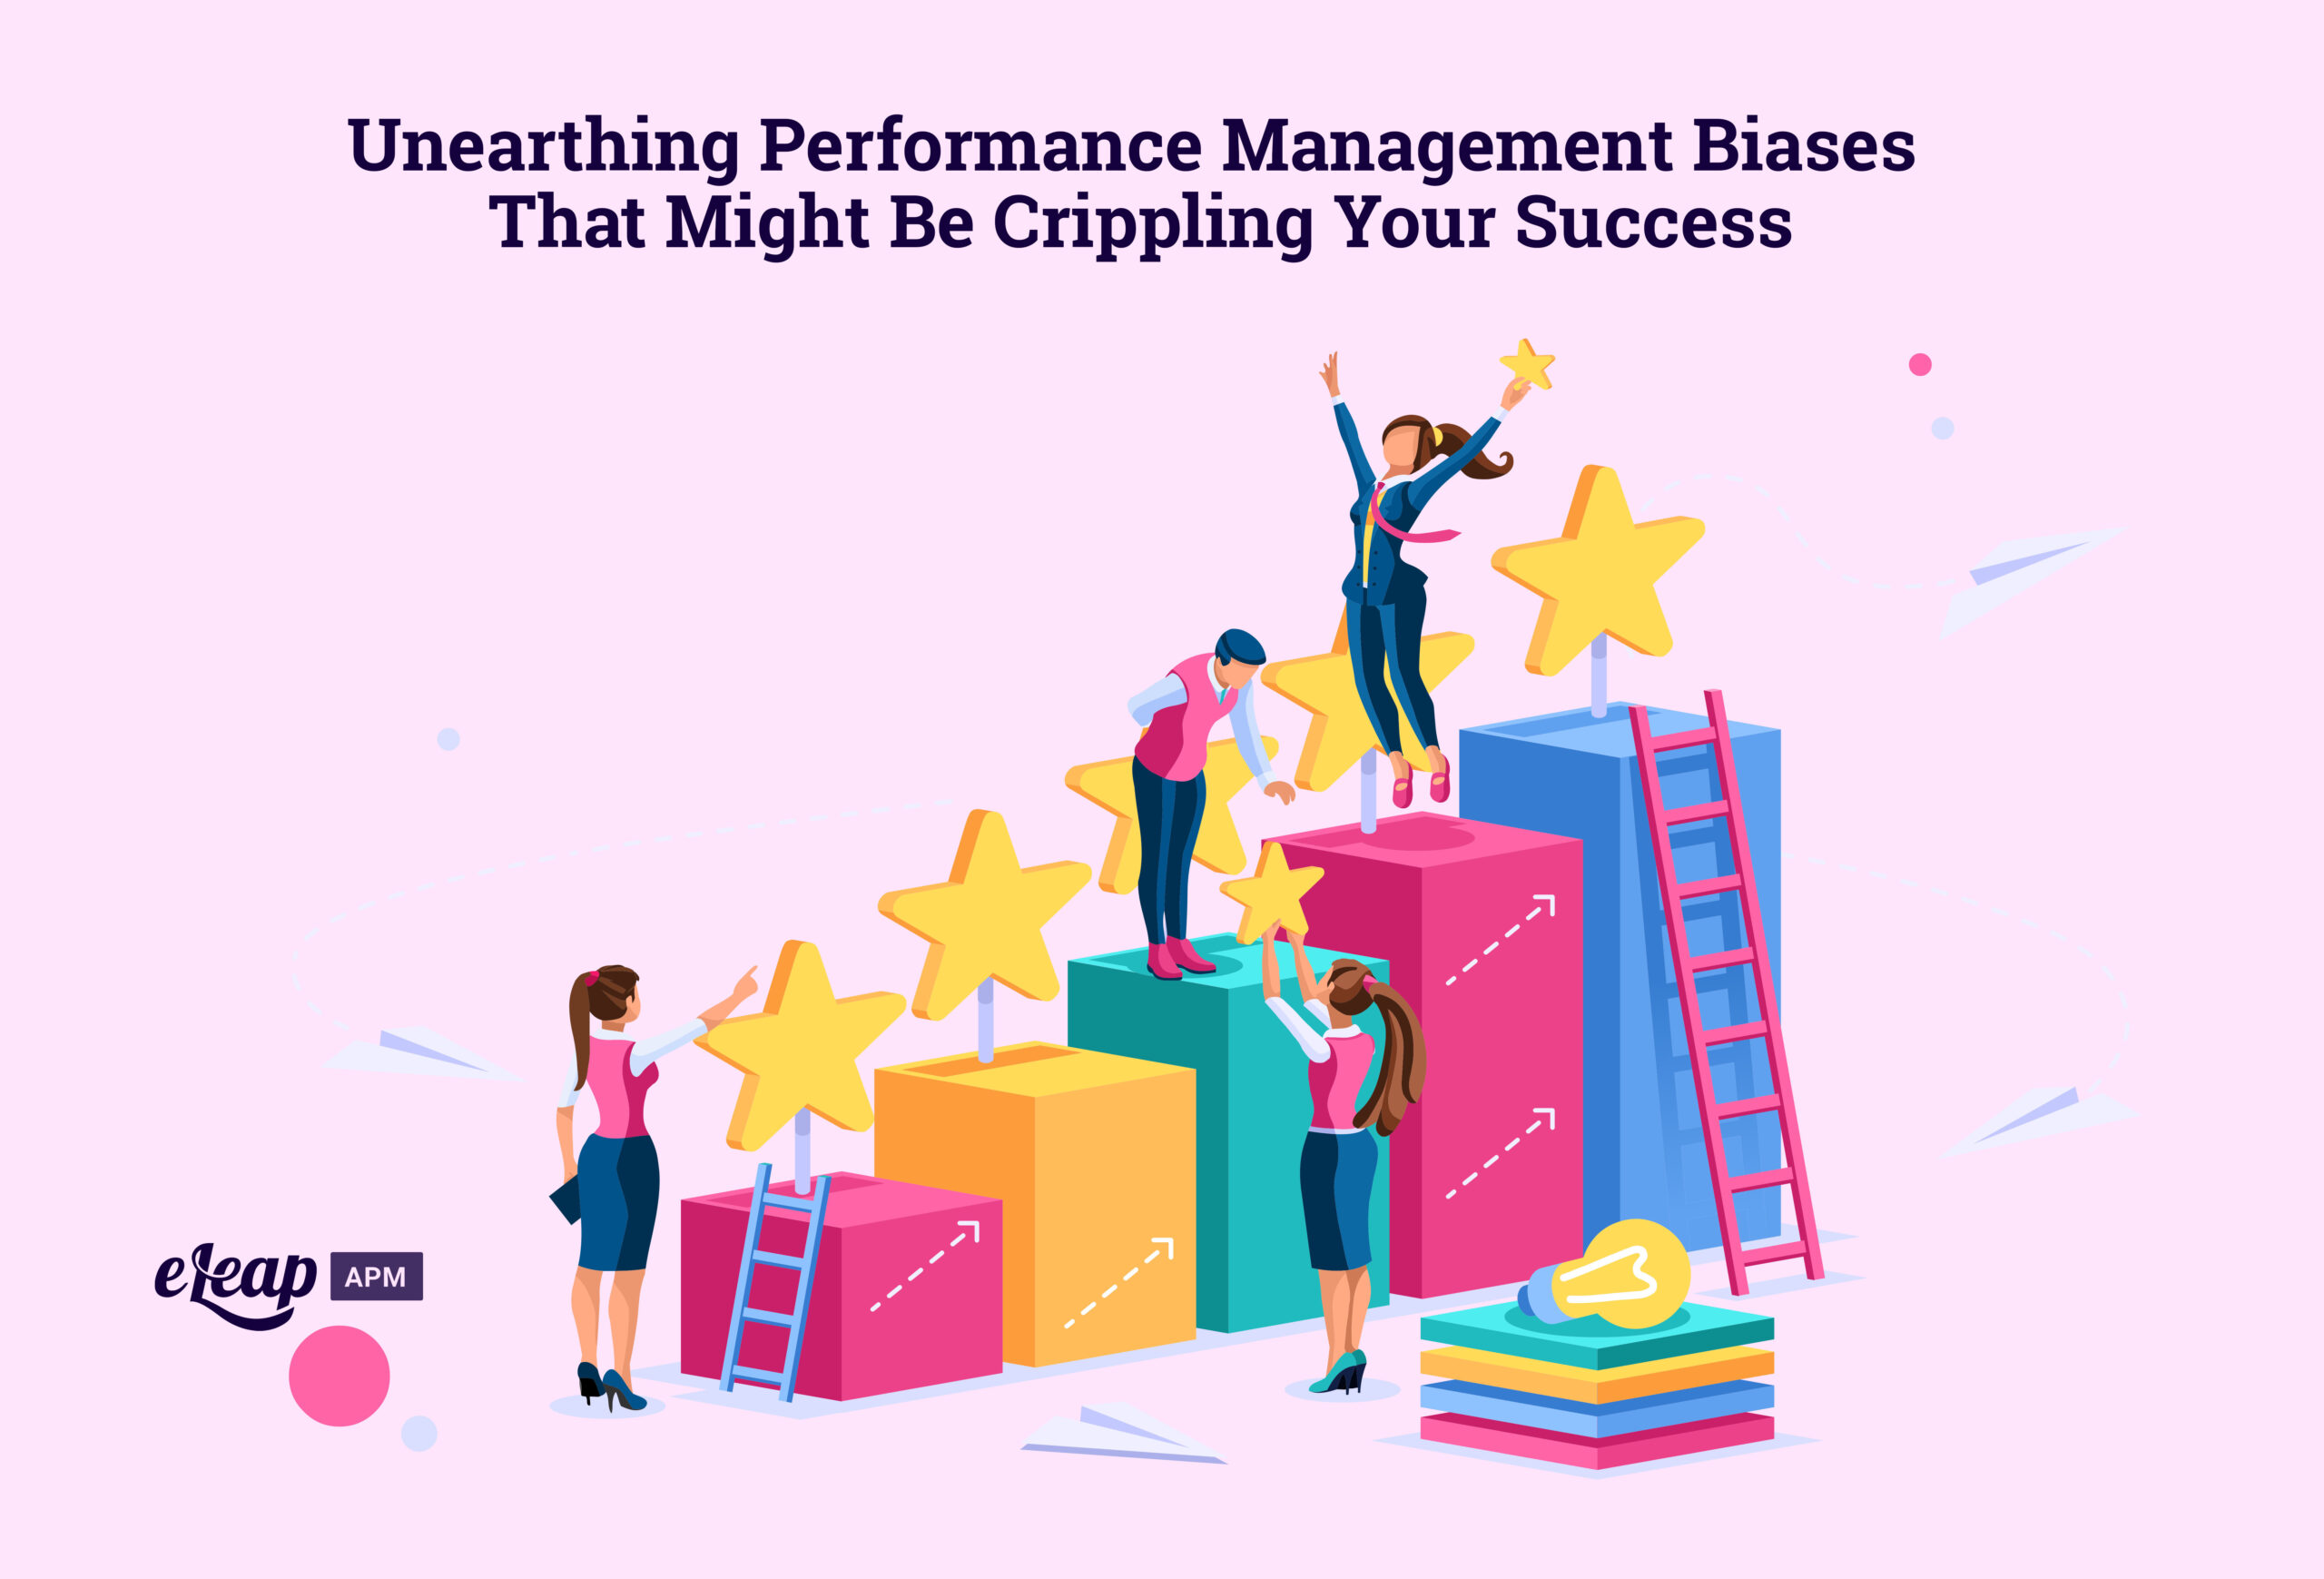 Unearthing Performance Management Biases That Might Be Crippling Your Success